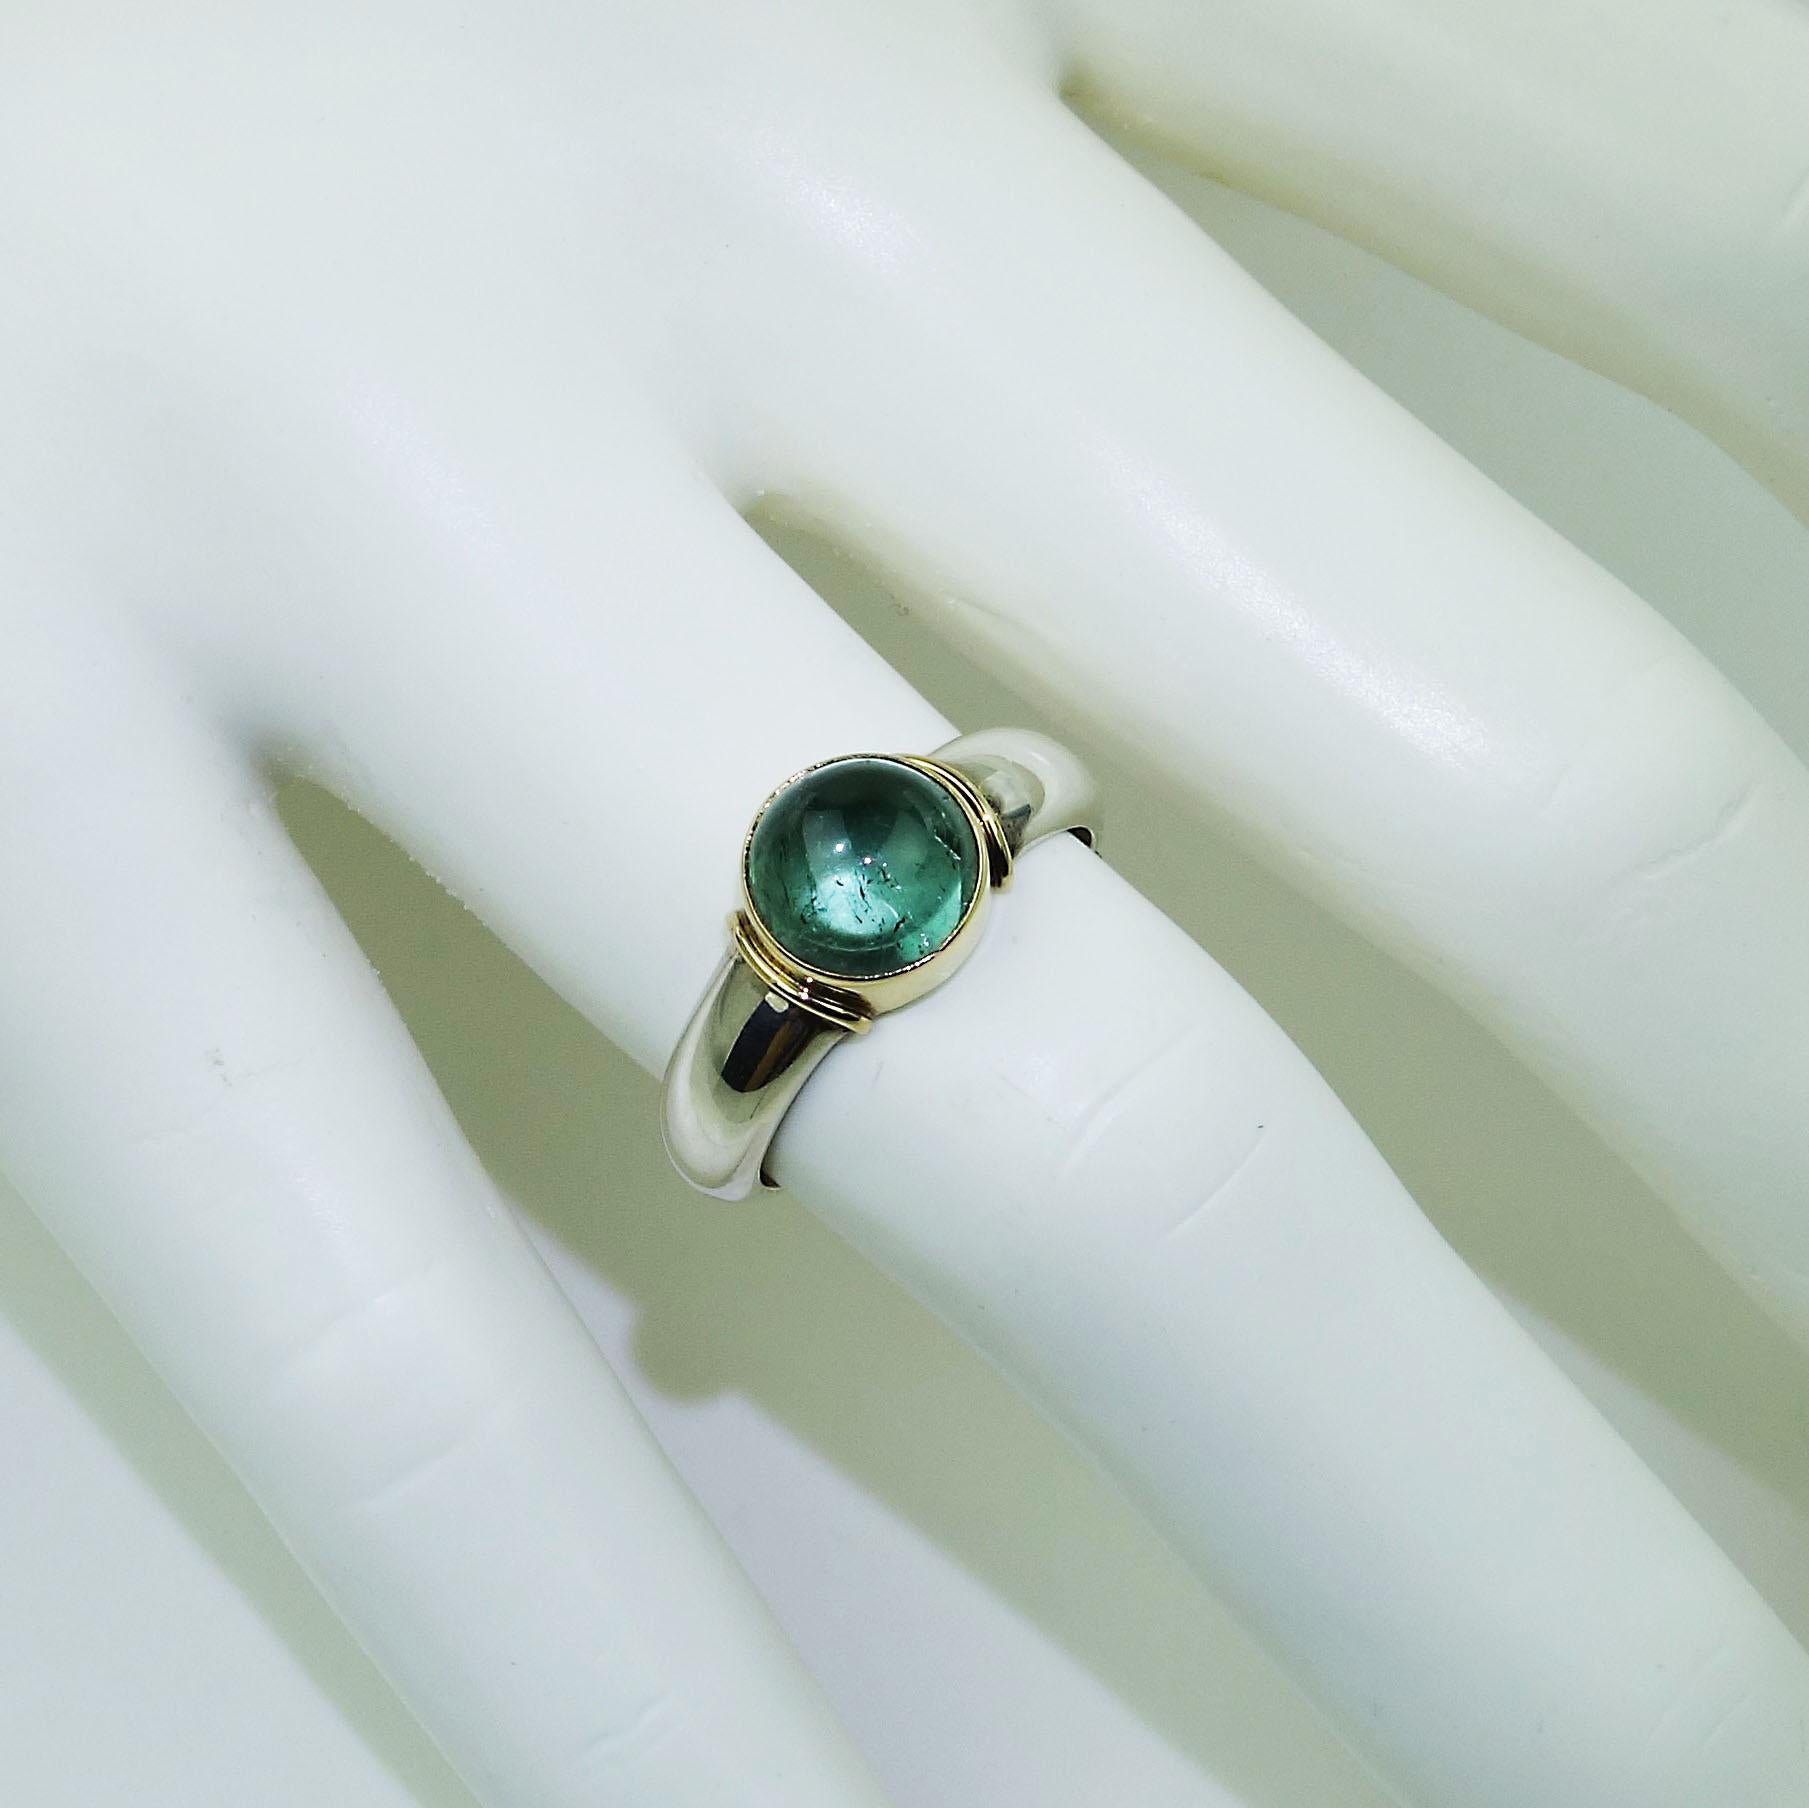 Artisan AJD Blue-Green Cabochon Tourmaline and Sterling Silver Ring with 18K Gold 